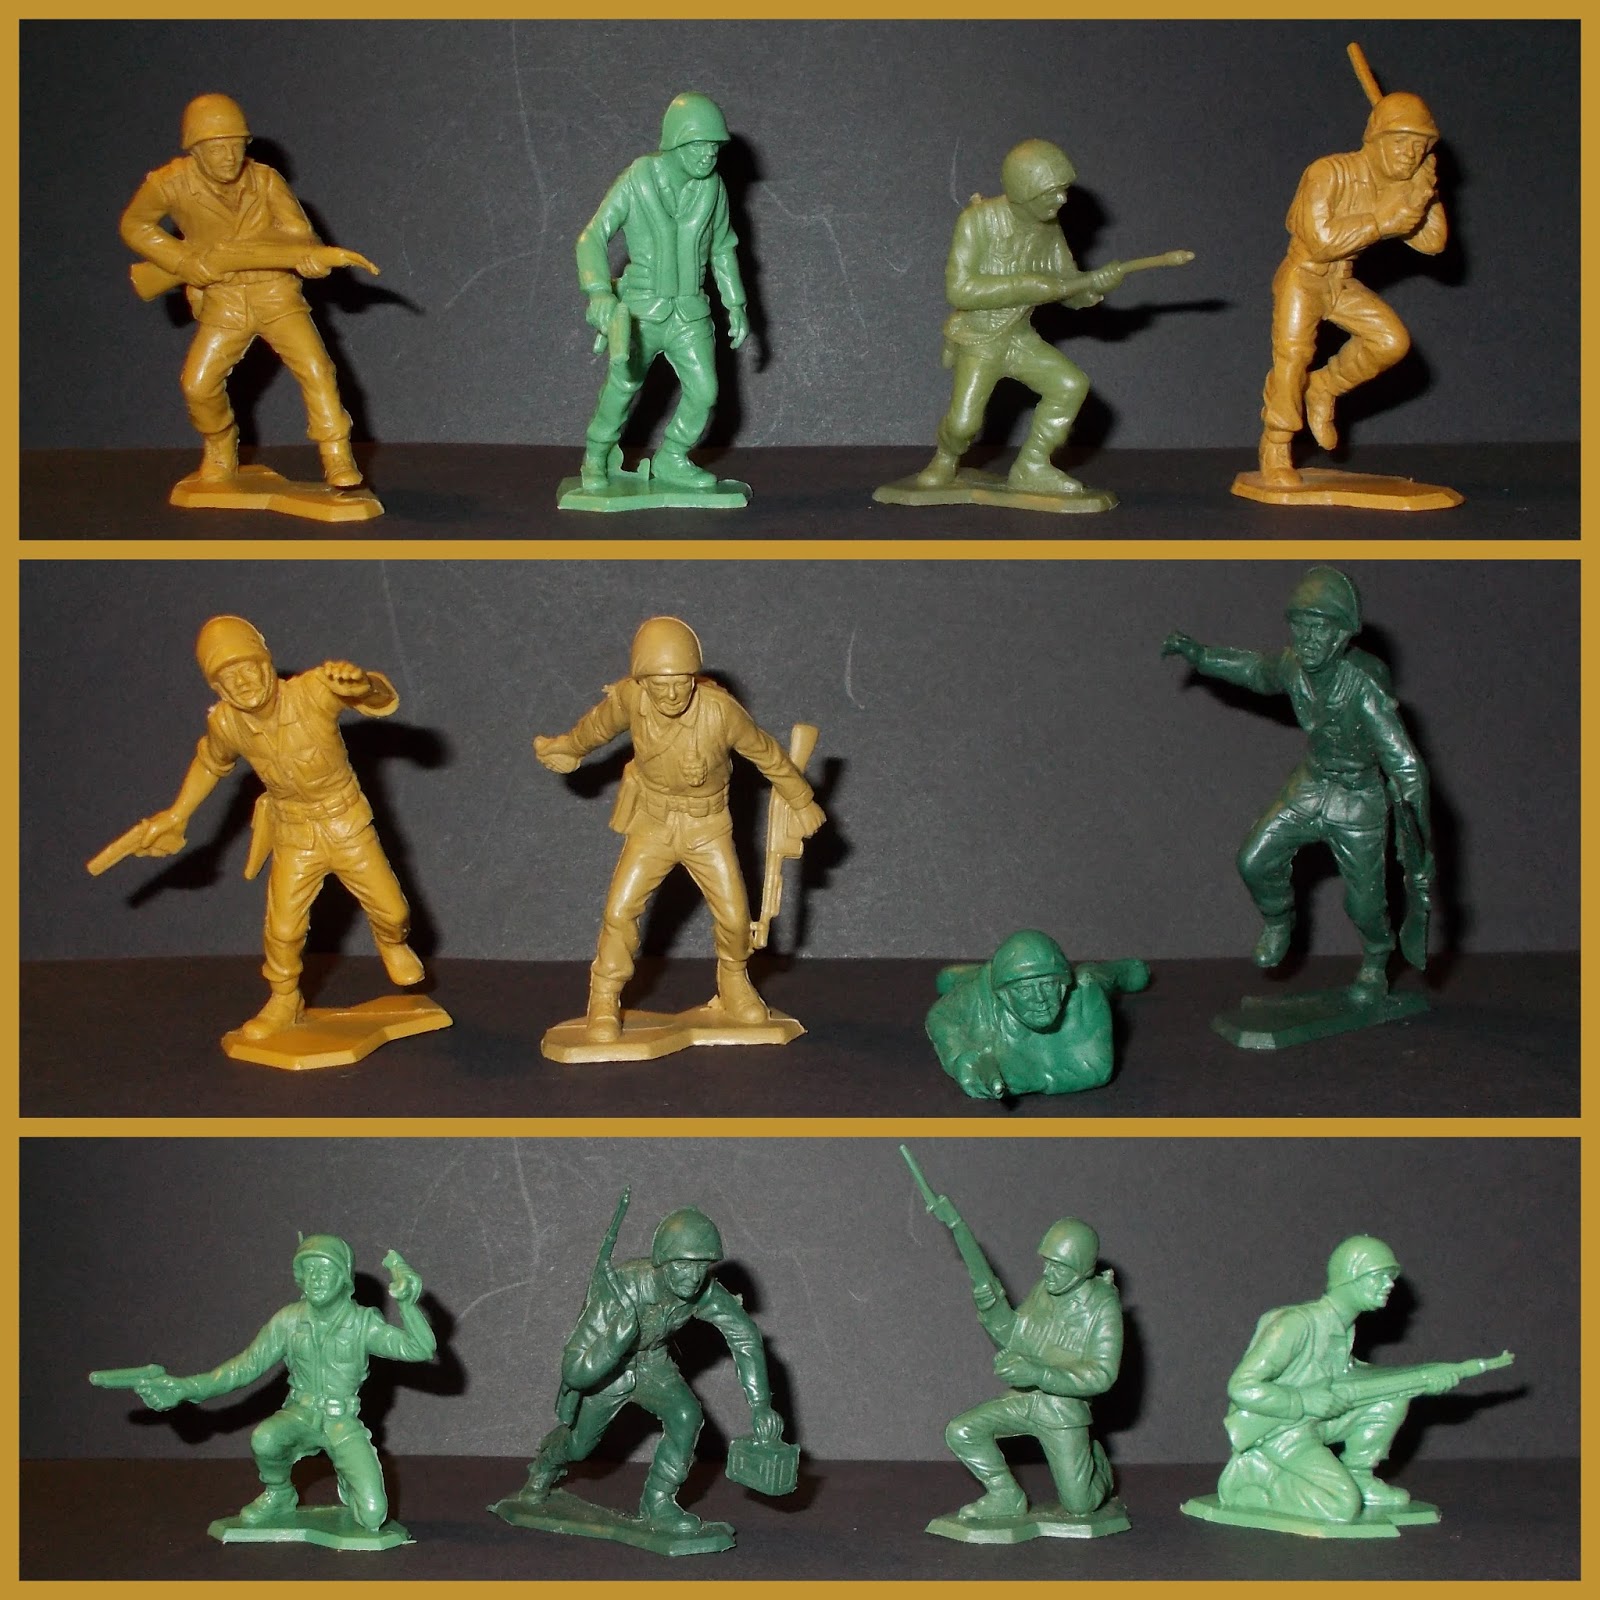 - Gray 54MM AIRFIX & MARX WWII GERMAN Afrika Korp Toy Soldiers COPIES - 